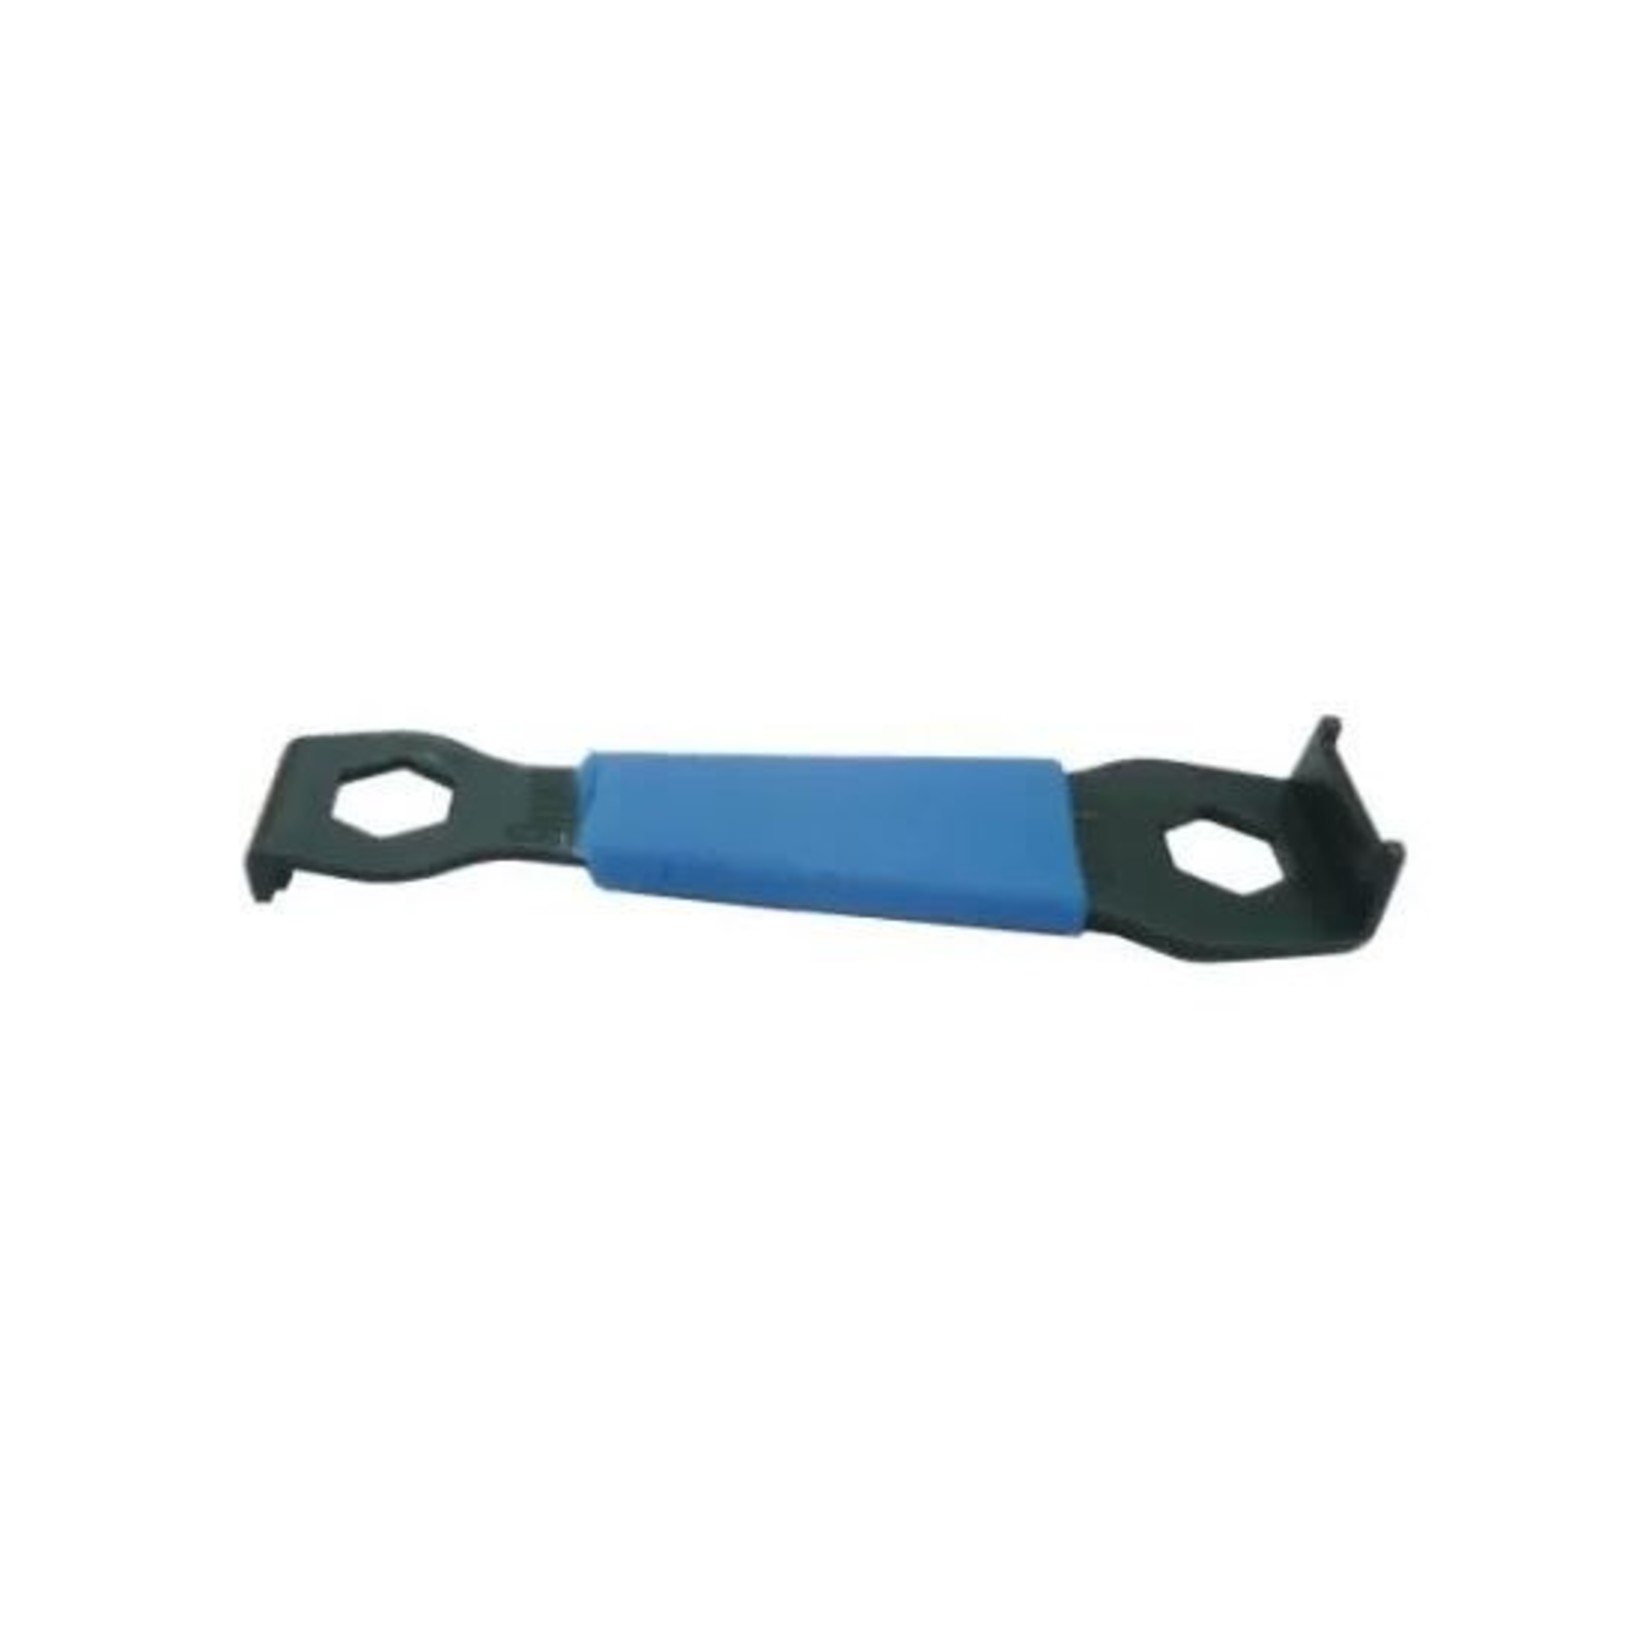 Pro Series Pro-Series - Bike/Cycling Tool - Chainring Spanner With Crank Cover Wrench